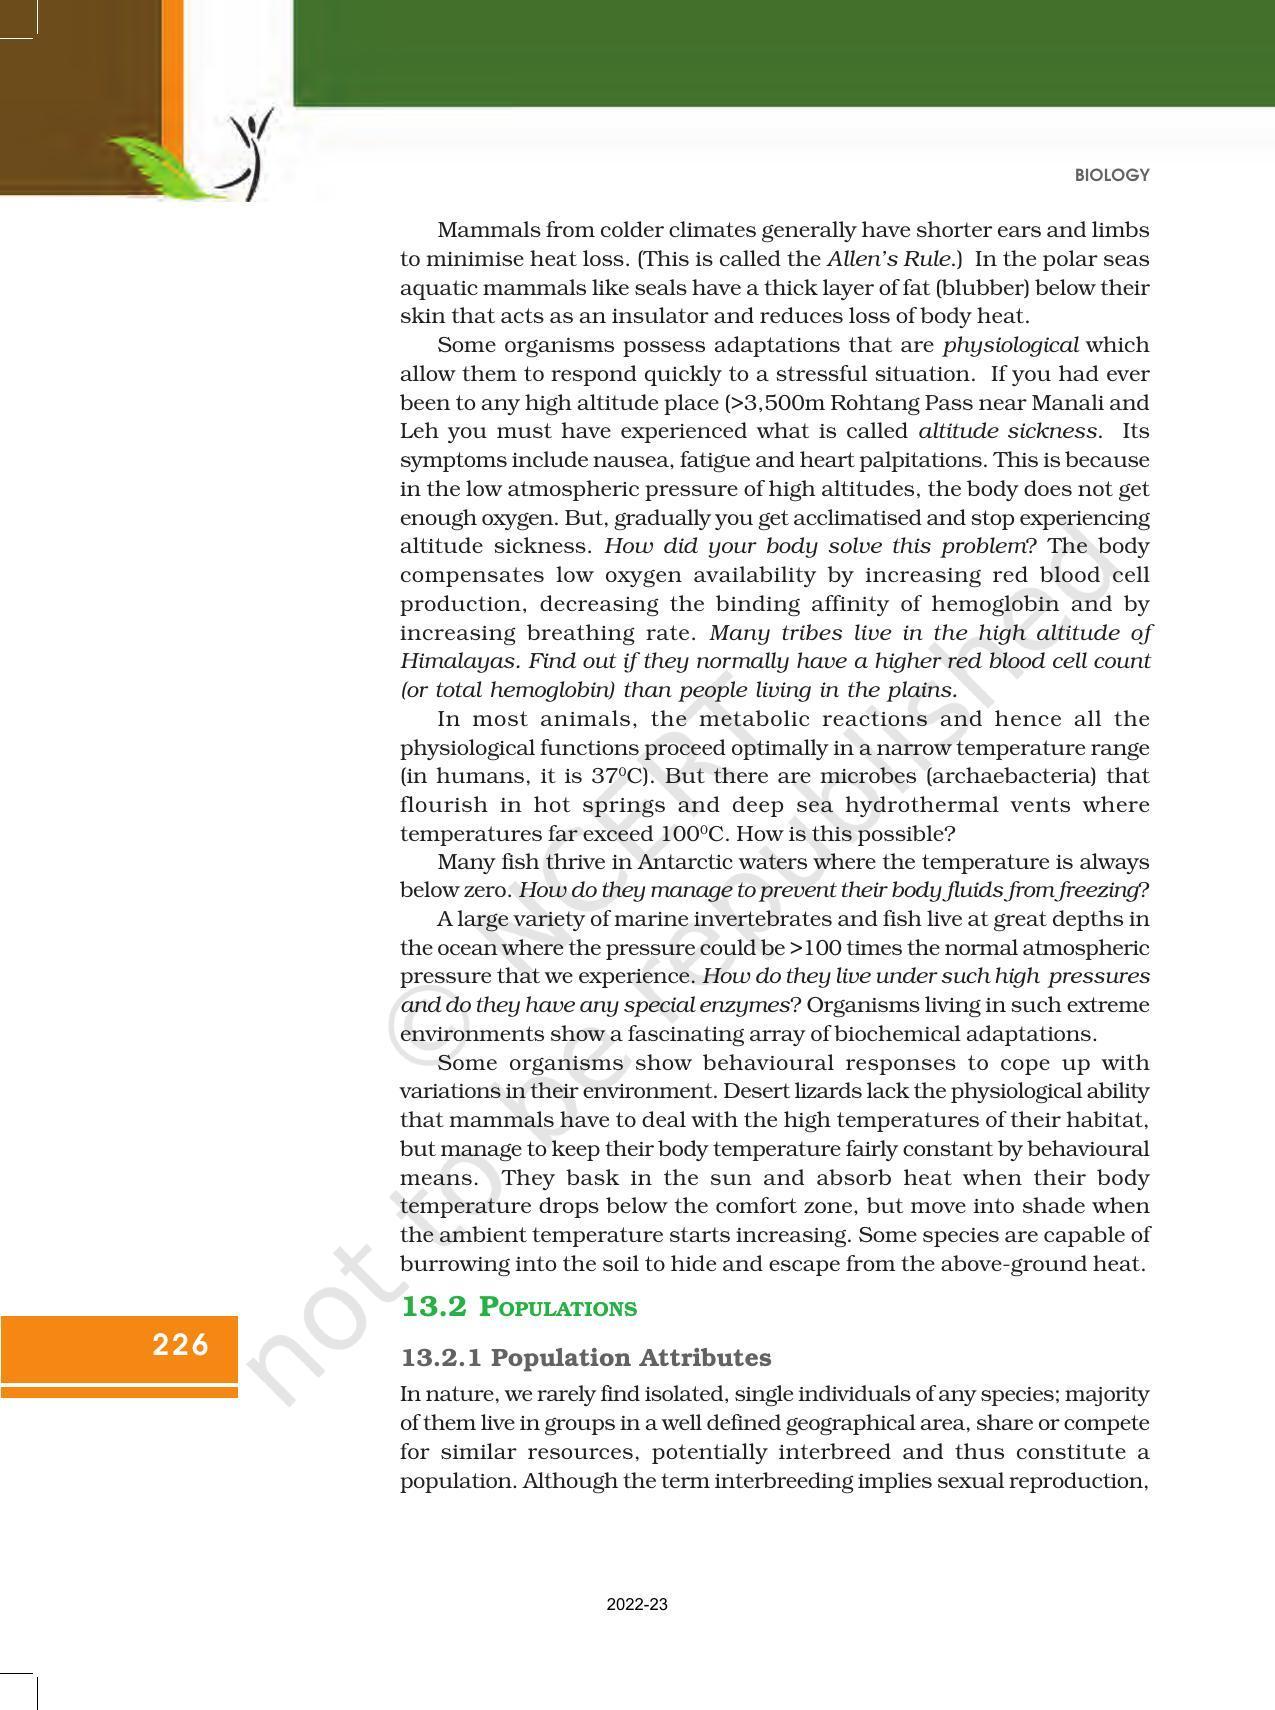 NCERT Book for Class 12 Biology Chapter 13 Organisms and Populations - Page 10